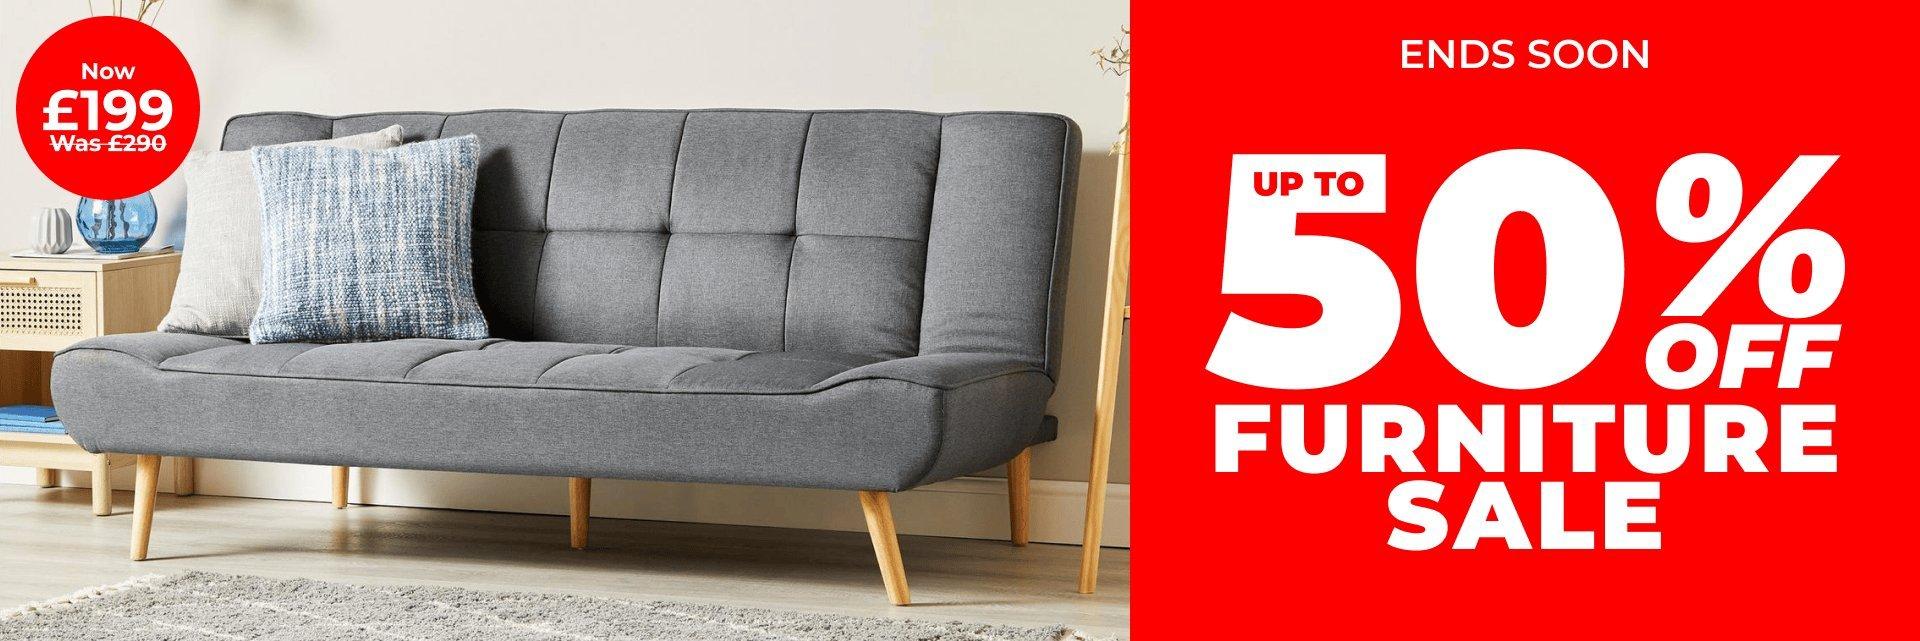 Up To 50% Off Furniture Sale